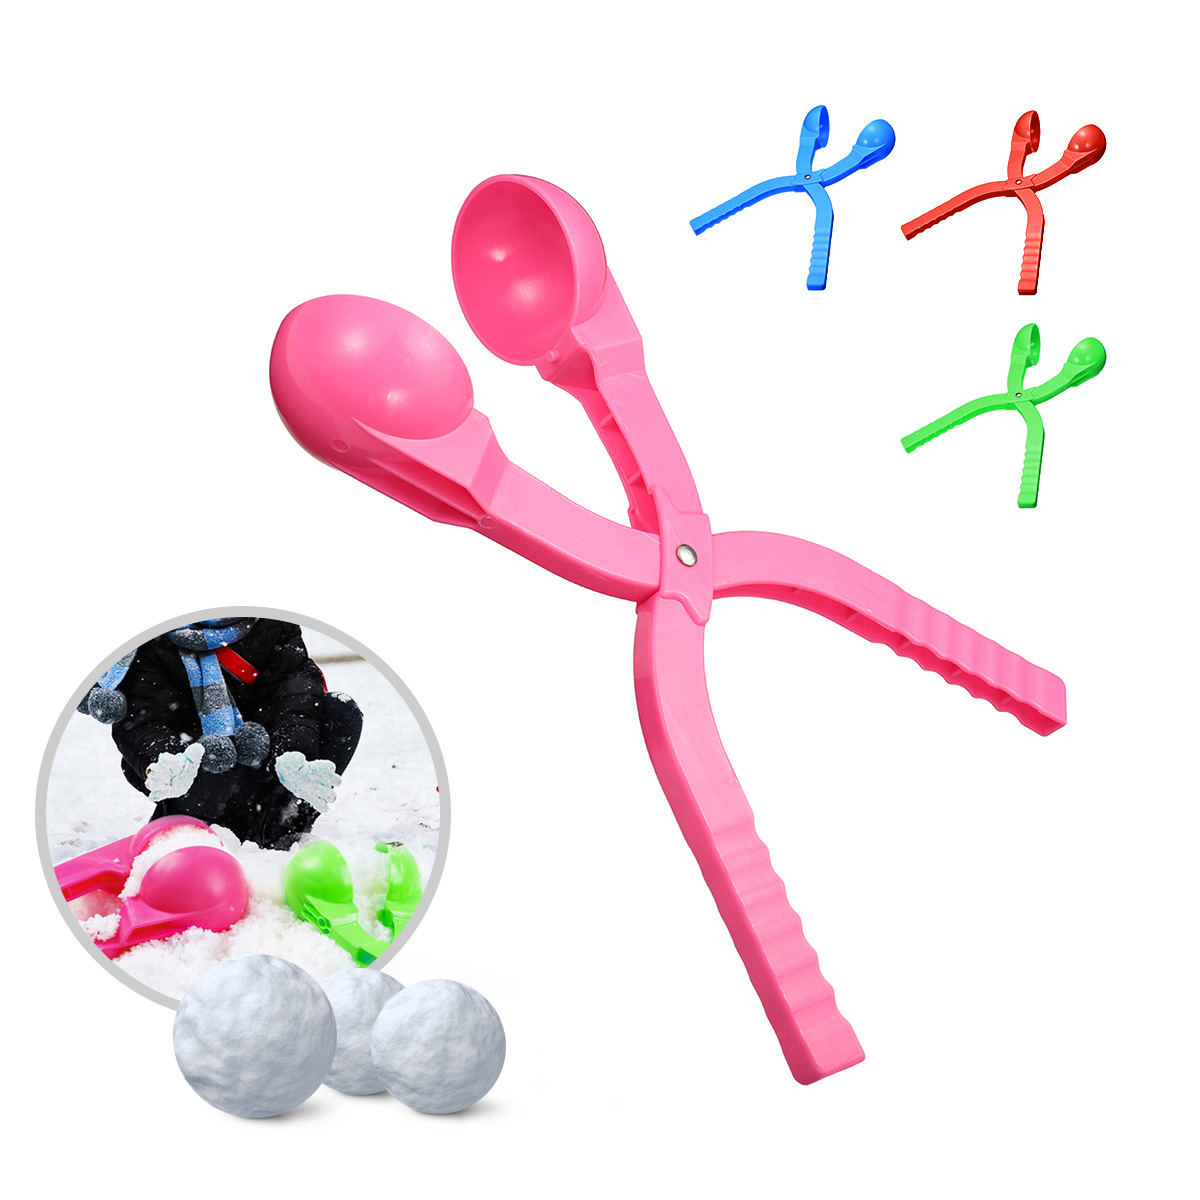 4-Pcs-Winter-Snow-Balls-Maker-Child-Snowballs-Scoop-Family-Time-Kids-Adult-Gift-Toys-Outdoor-Skating-1892042-1